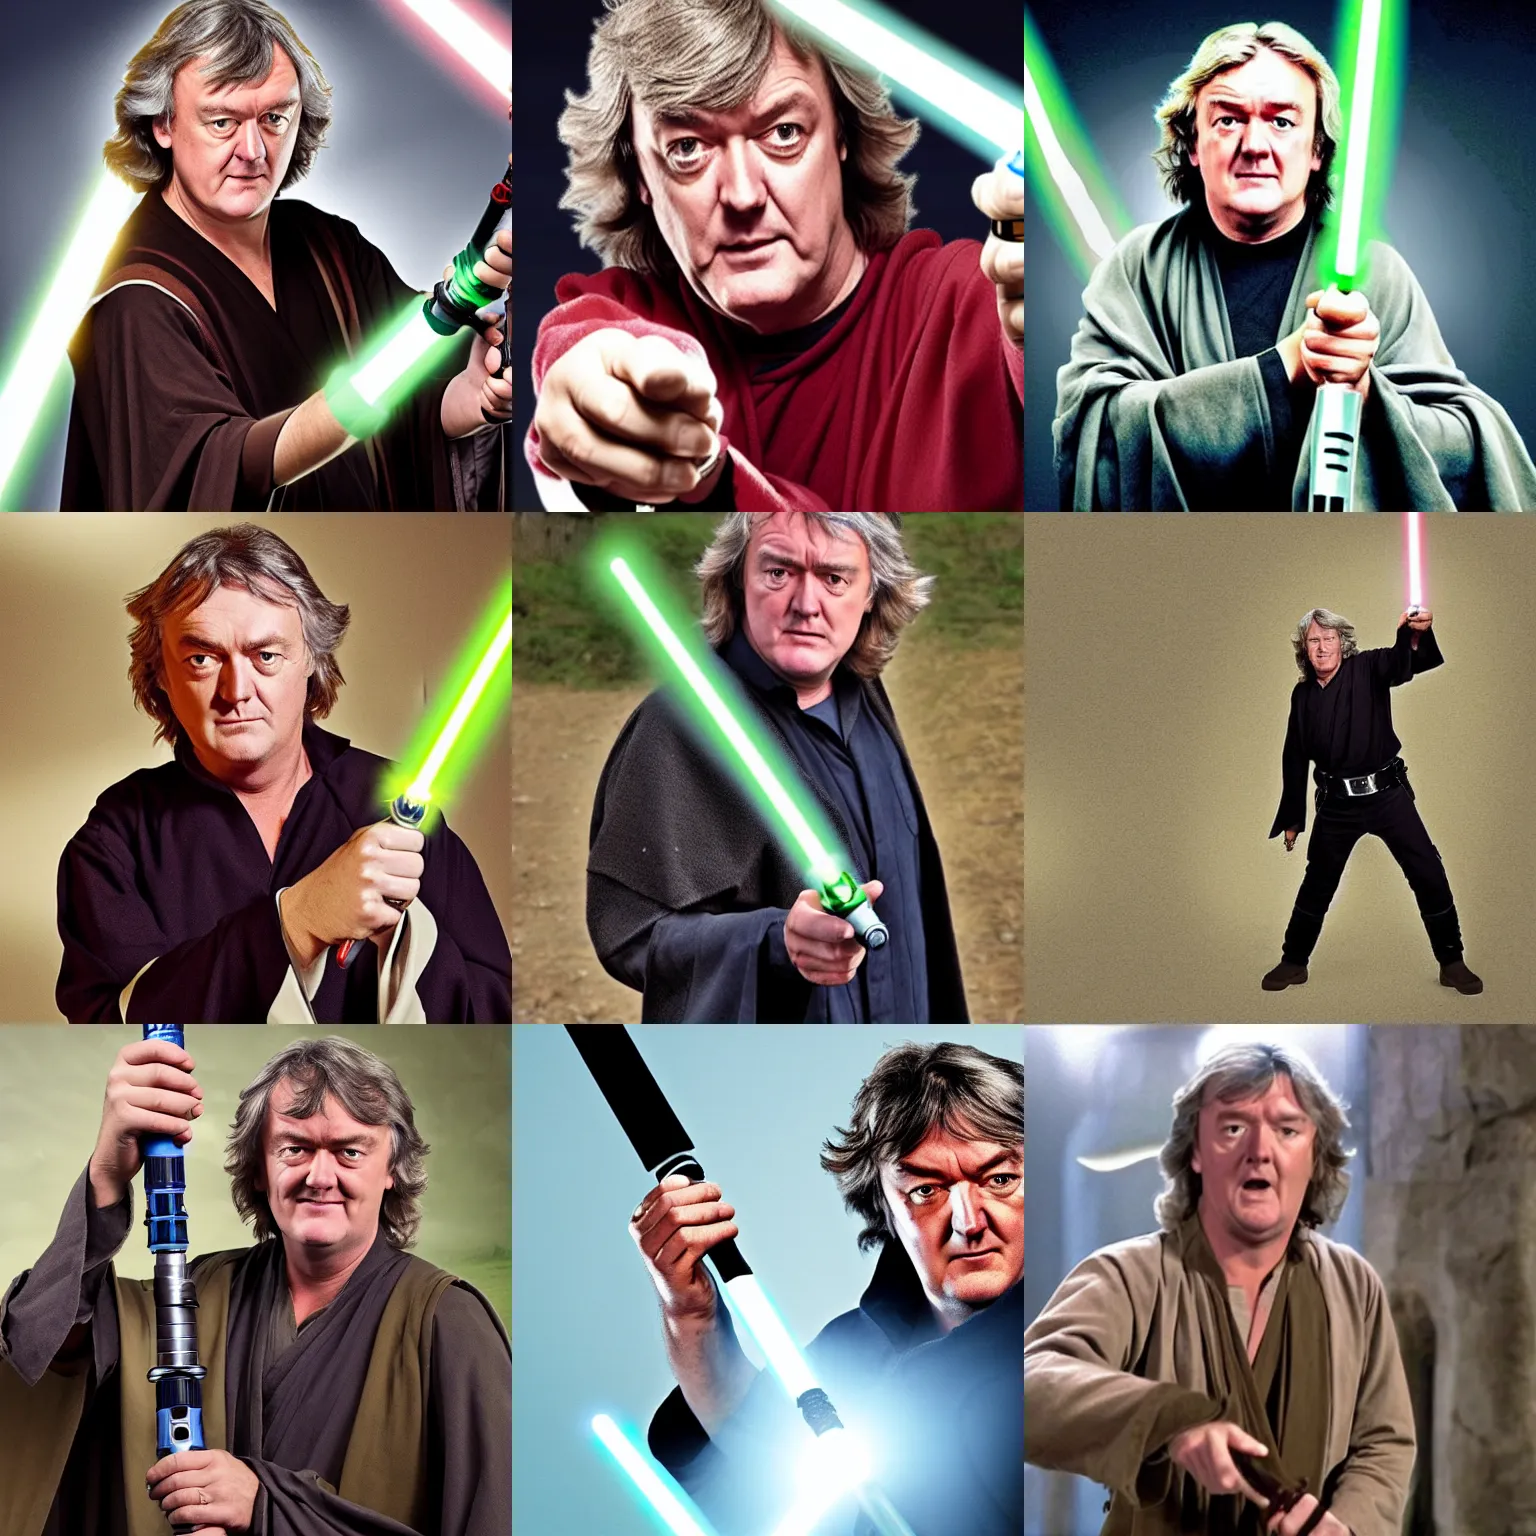 Prompt: James May as a Jedi master with a lightsaber prepared to fight